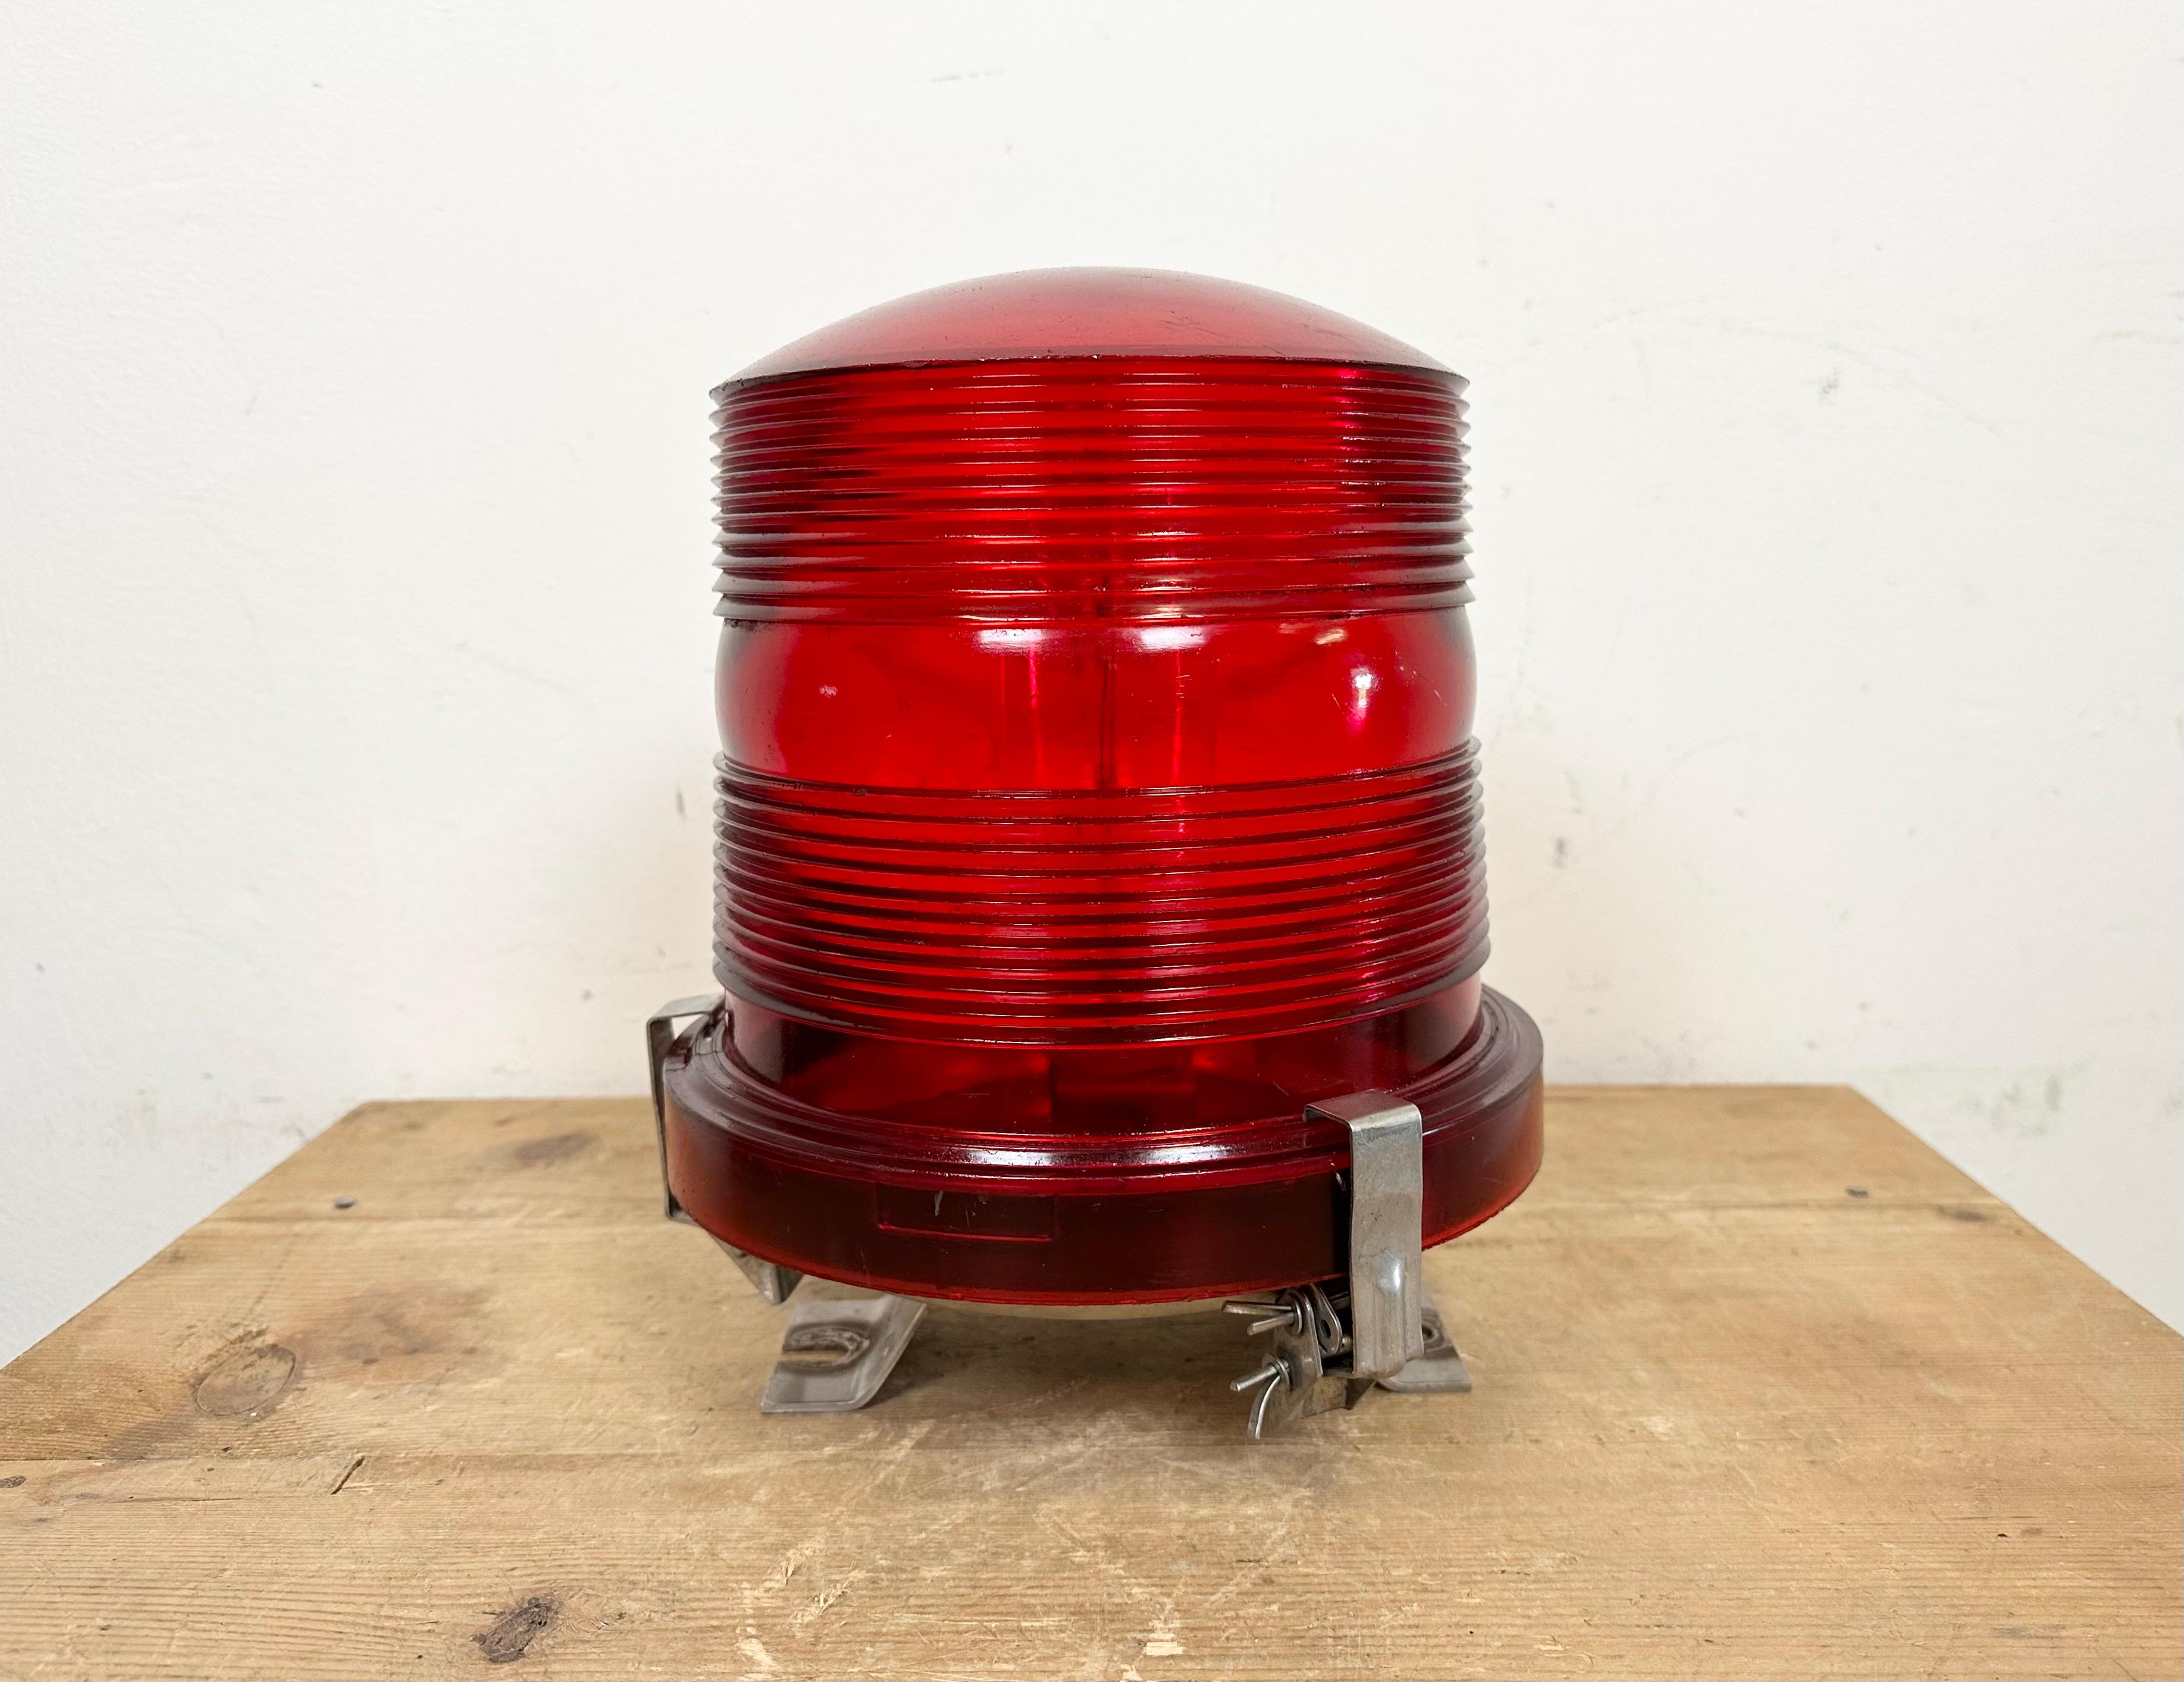 Vintage industrial airport runway floor lamp made by Polam Wilkasy in Poland during the 1960s. It features an iron floor mounting and a red plexiglass cover.
The diameter of the light is 23 cm The weight is 1,7 kg. It can be use as also as a